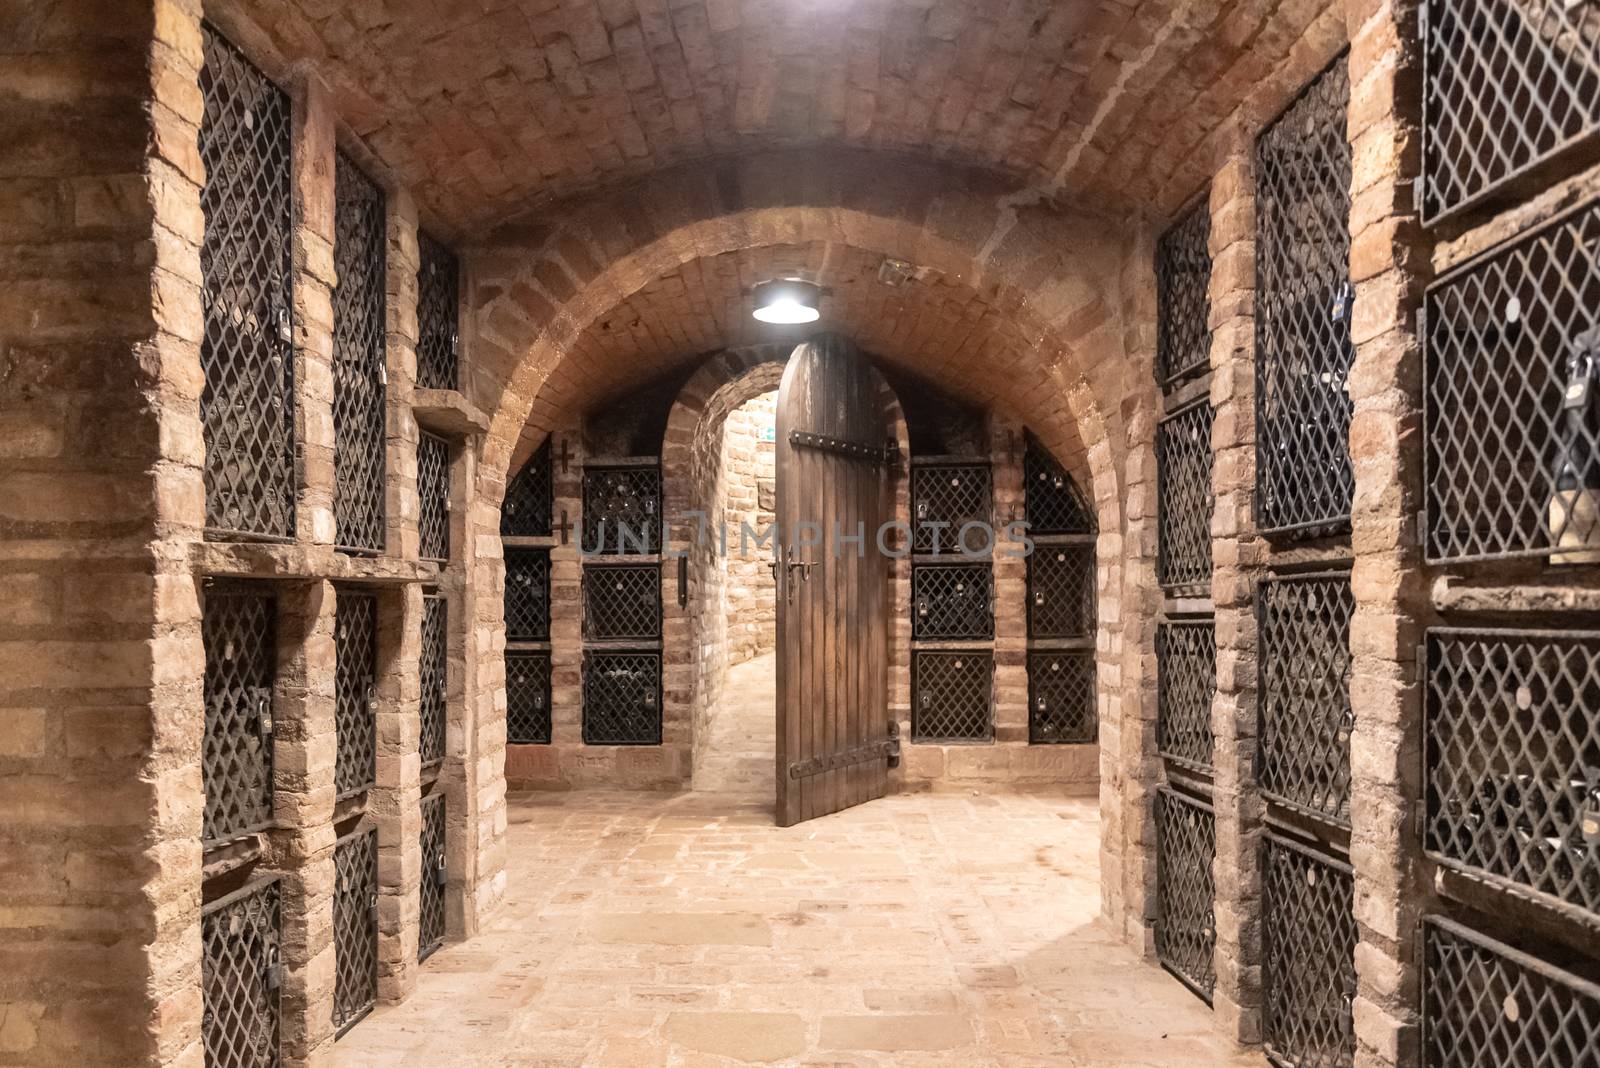 Old wine cellar with wine storage cases and open vintage wooden doors.